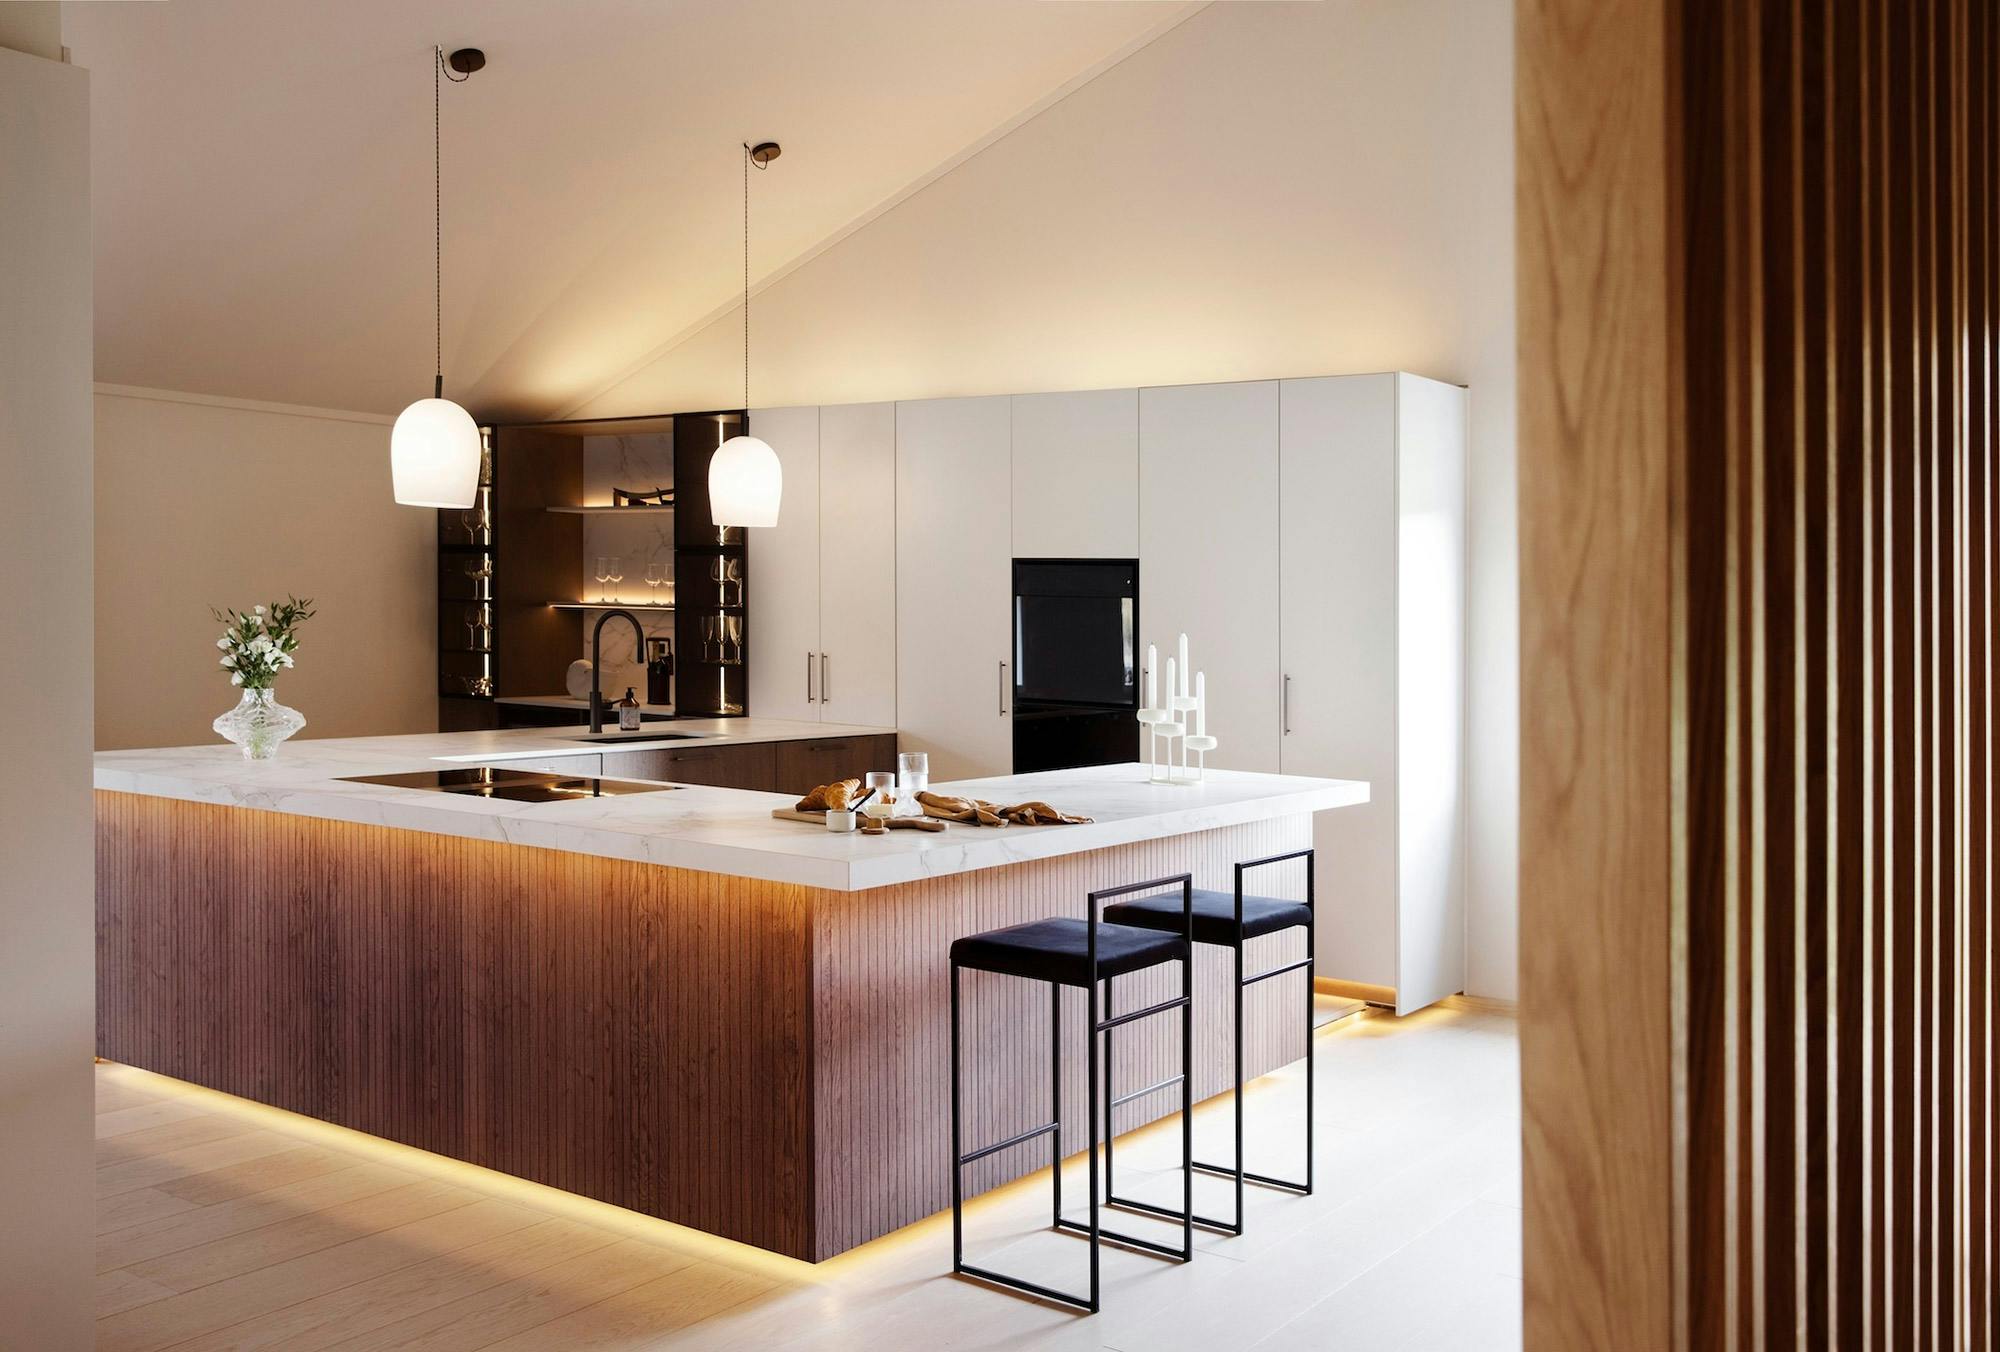 Numéro d'image 32 de la section actuelle de The countertop from Cosentino completes the expression in the kitchen de Cosentino France